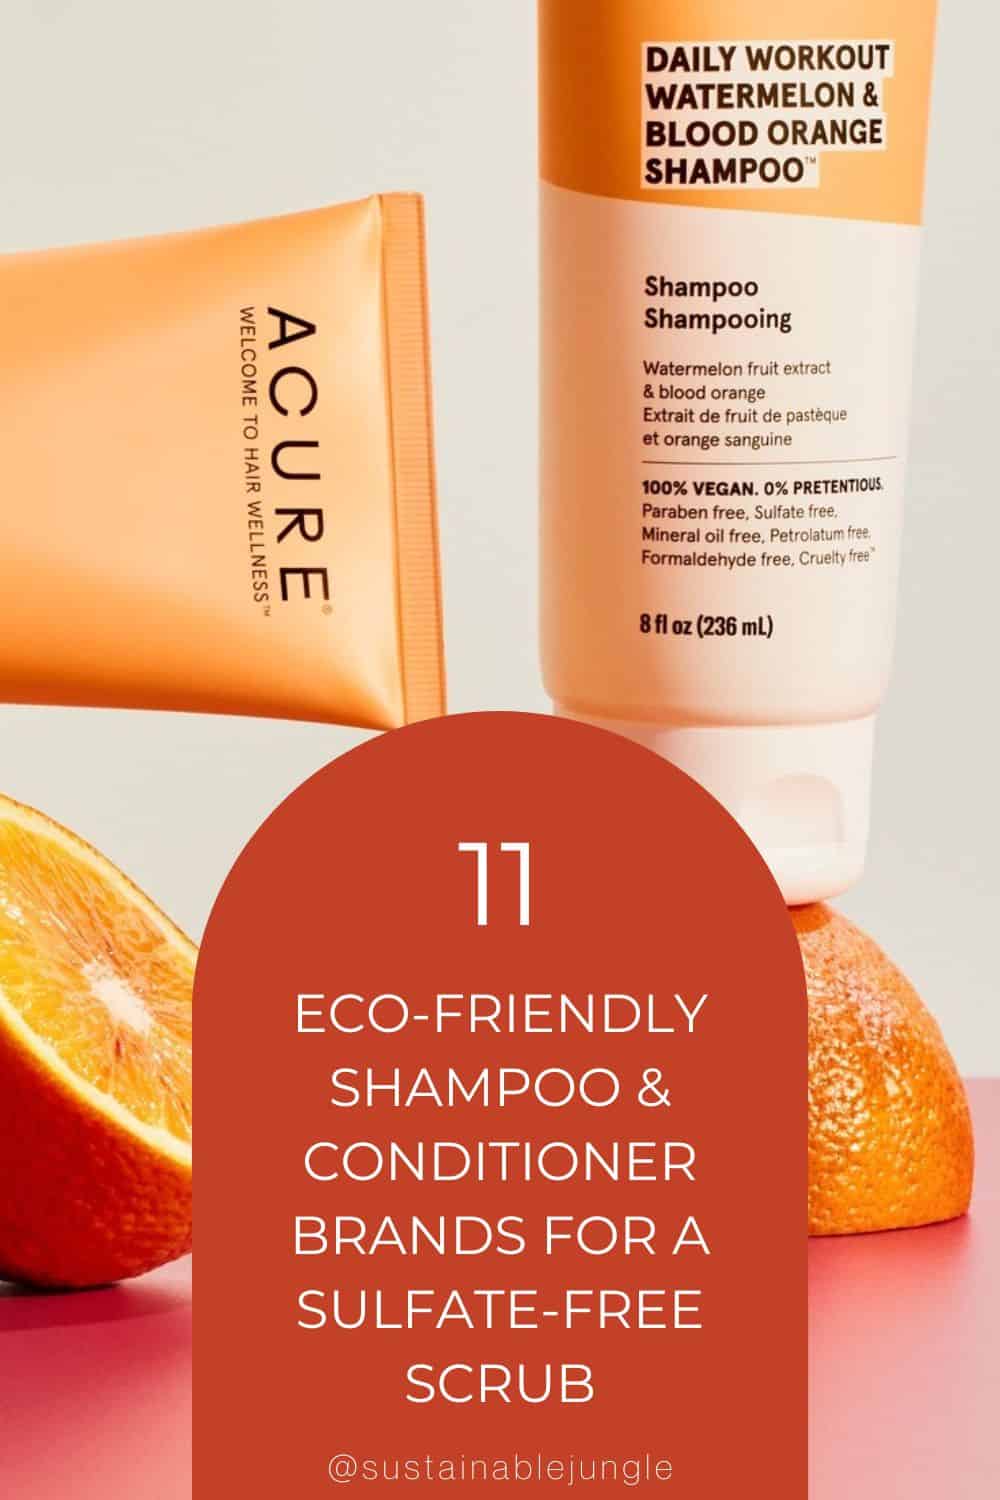 11 Eco-Friendly Shampoo & Conditioner Brands For A Sulfate-Free Scrub Image by Acure #ecofriendlyshampooandconditioner #bestecofriendlyconditioner #ecofriendlyshampooandconditionerbars #ecofriendlyshampoobrands #environmentallyfriendlyshampoo #environmentalfriendlyshampoo #sustainablejungle